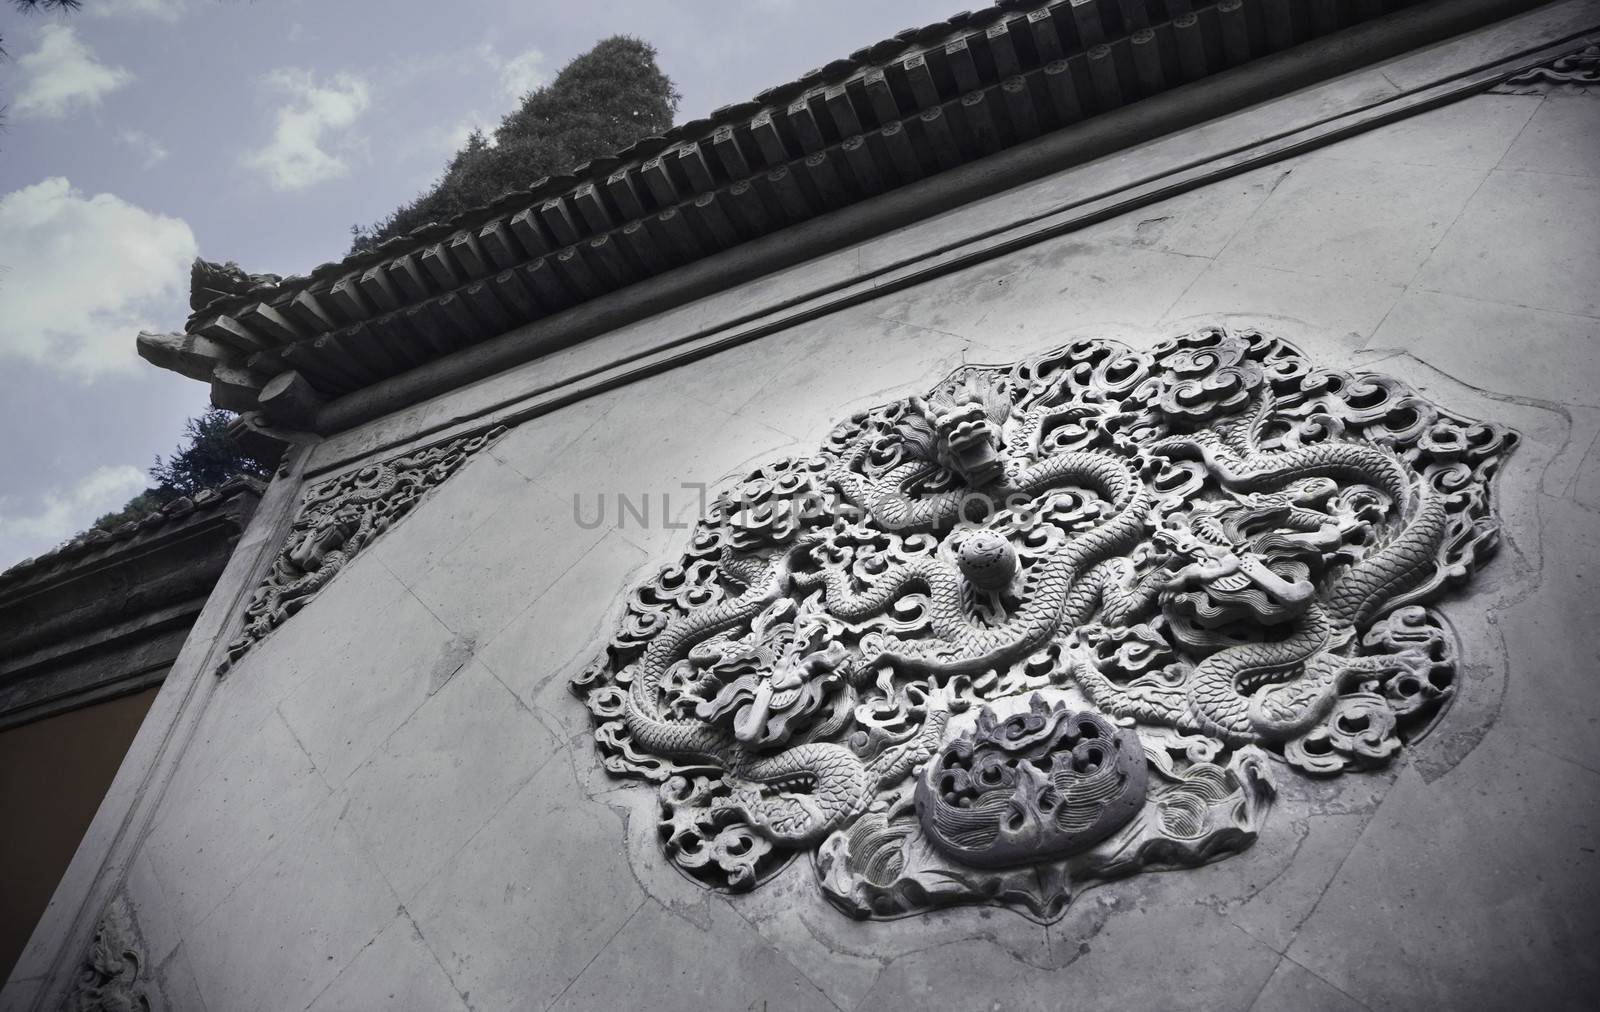 Ornate low relief sculpture of dragon on wall.